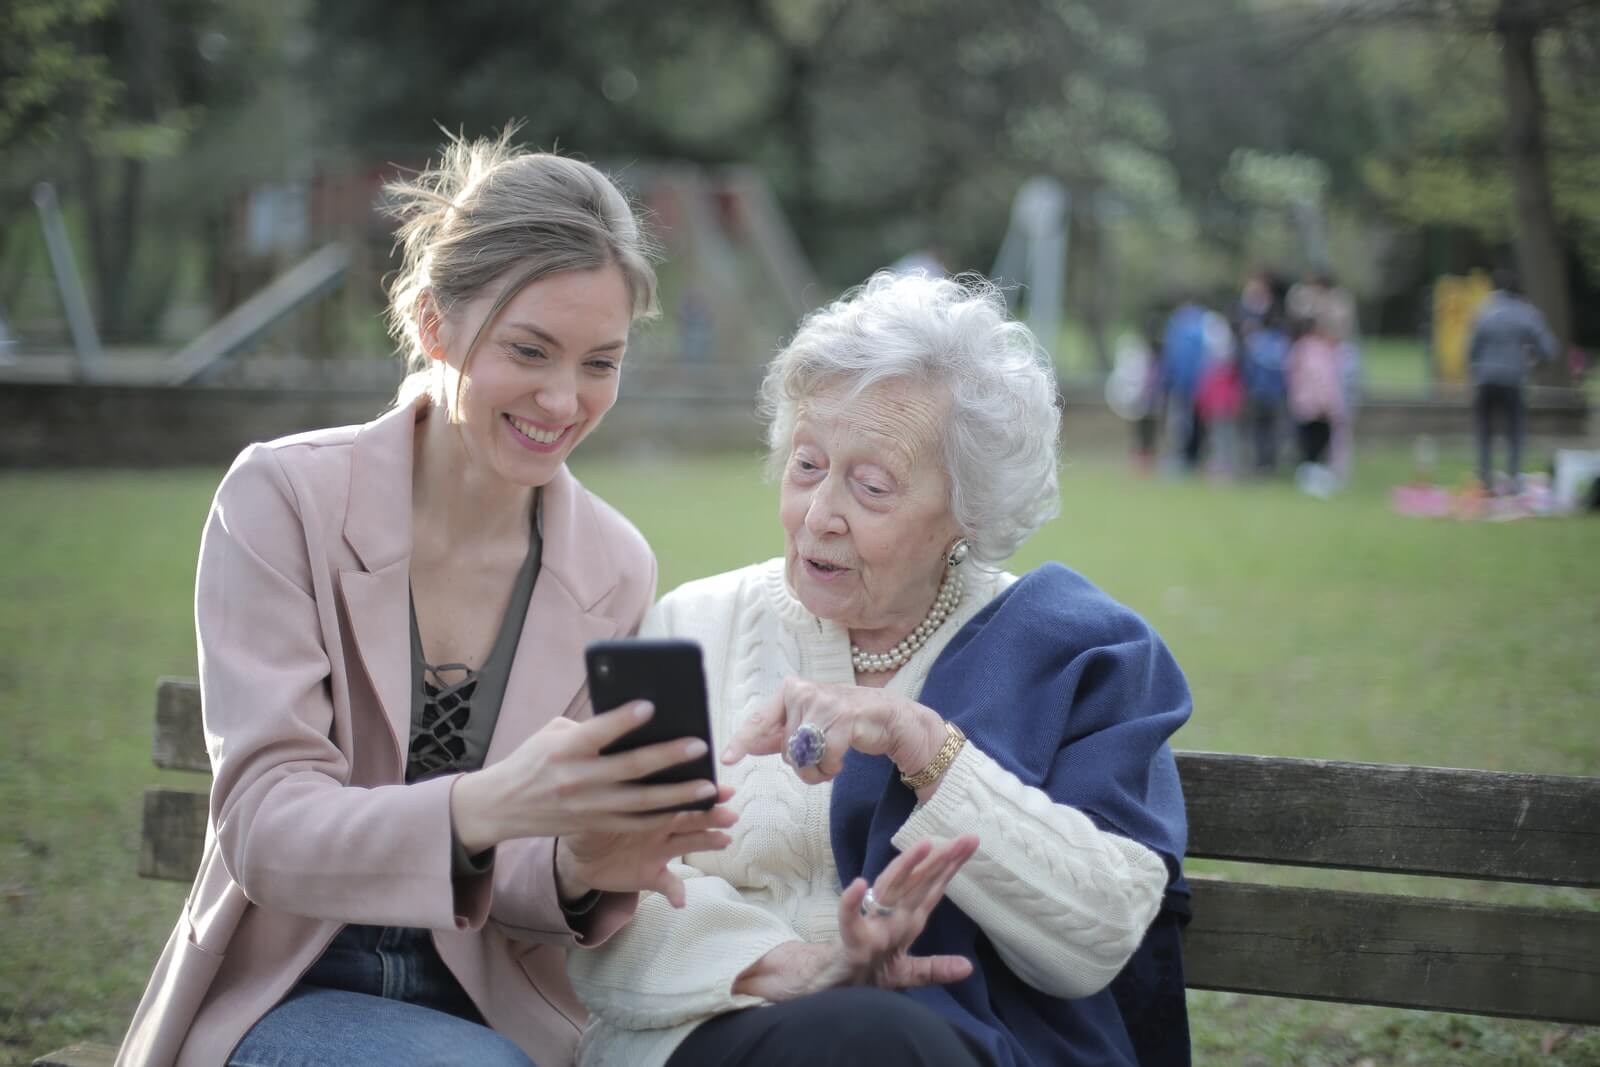 A senior citizen's adult daughter shows her the website of a senior living community on her smart phone.